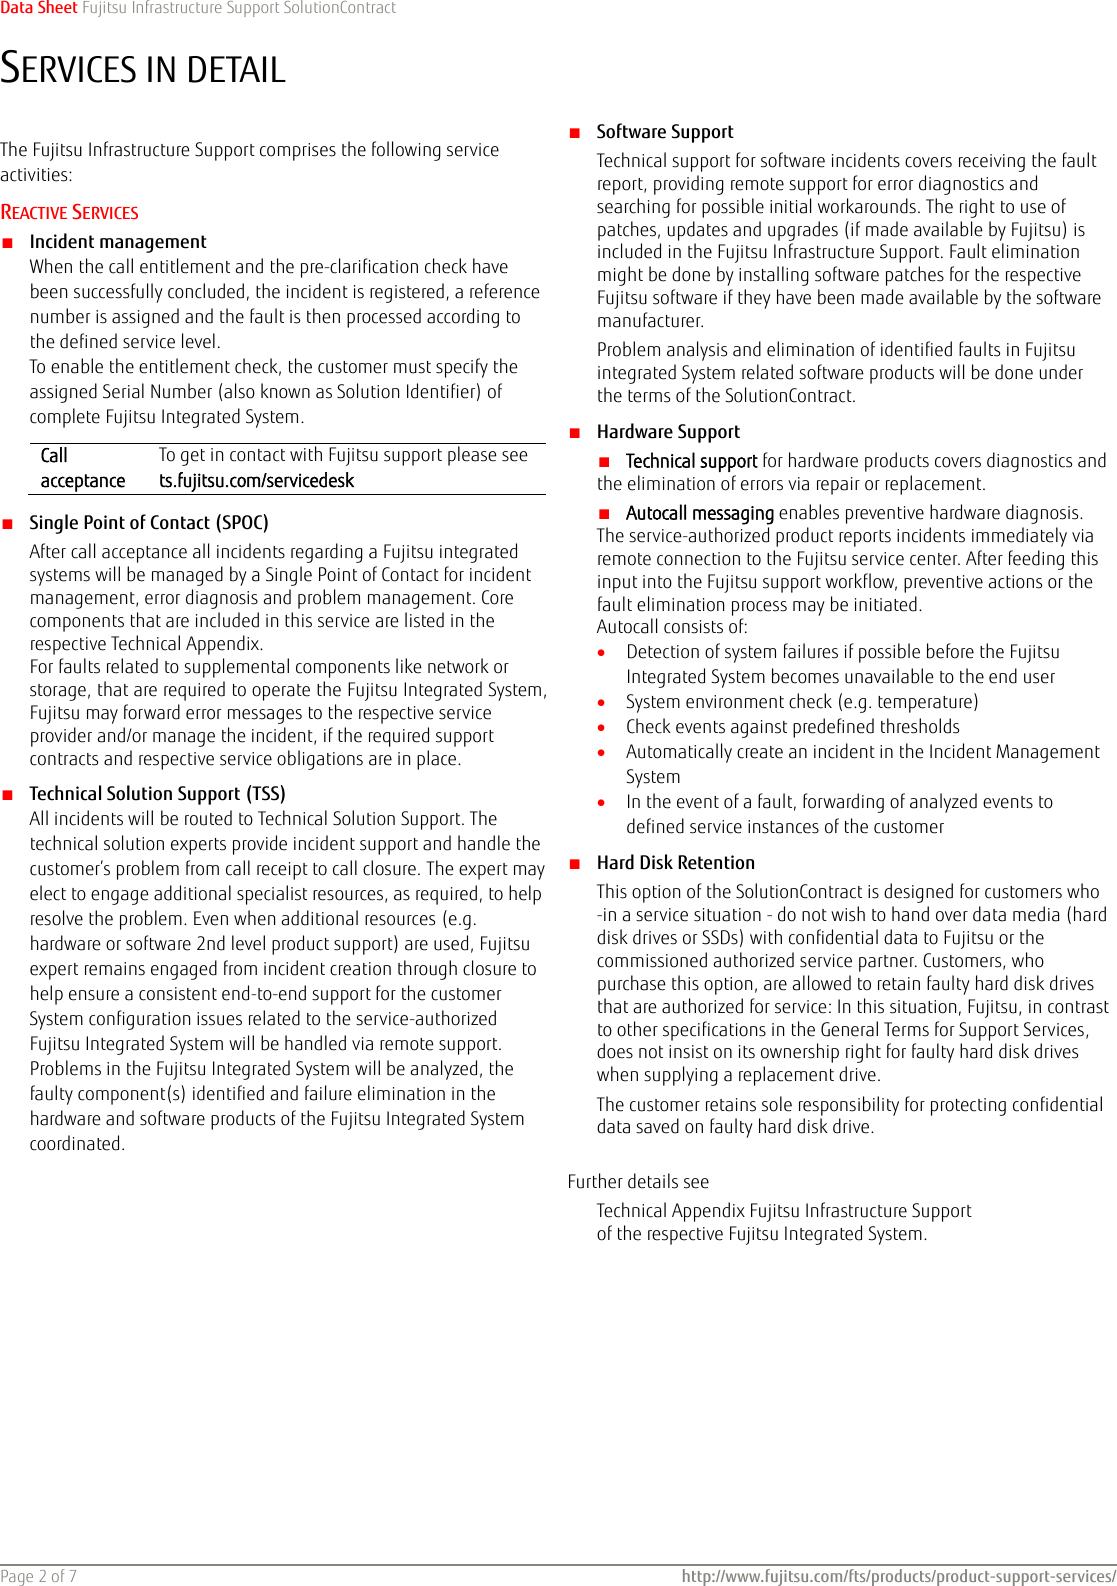 Page 2 of 7 - Data Sheet FUJITSU Infrastructure Support SolutionContract Solution Contract Ds-services-FIS-Solution Contract-en